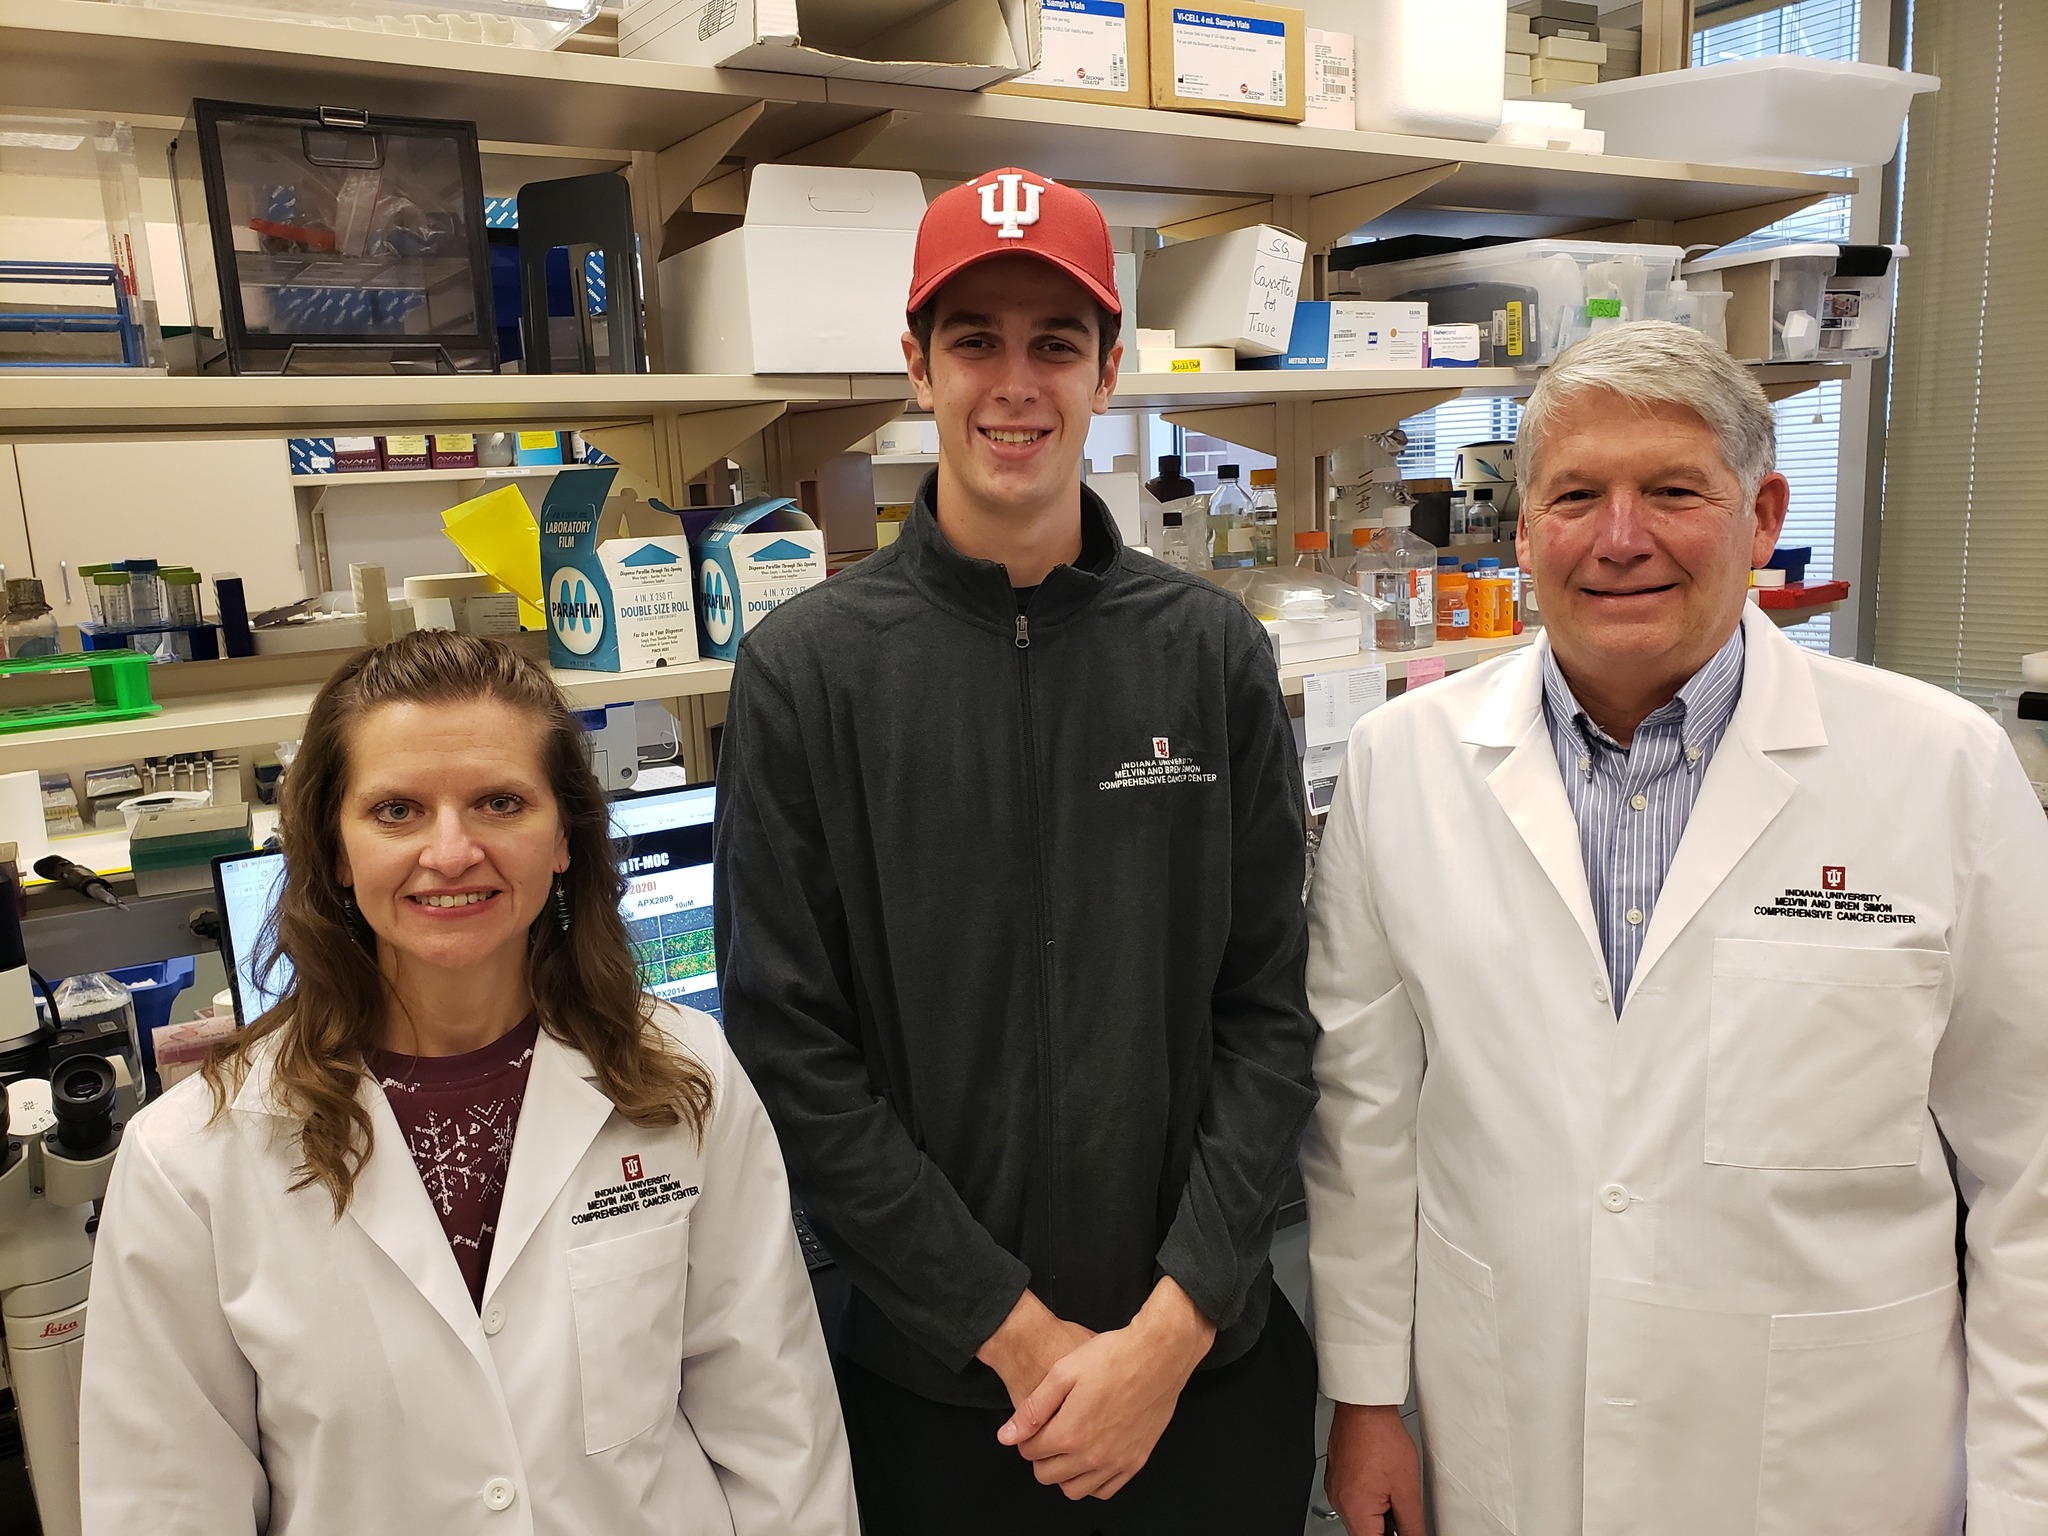 Jackson Lee of Jackson Lee Racing met IU Simon Comprehensive Cancer Center researchers Melissa Fishel, PhD, and Mark Kelley, PhD, in their labs to learn about their work, which primarily focuses on pancreatic cancer.